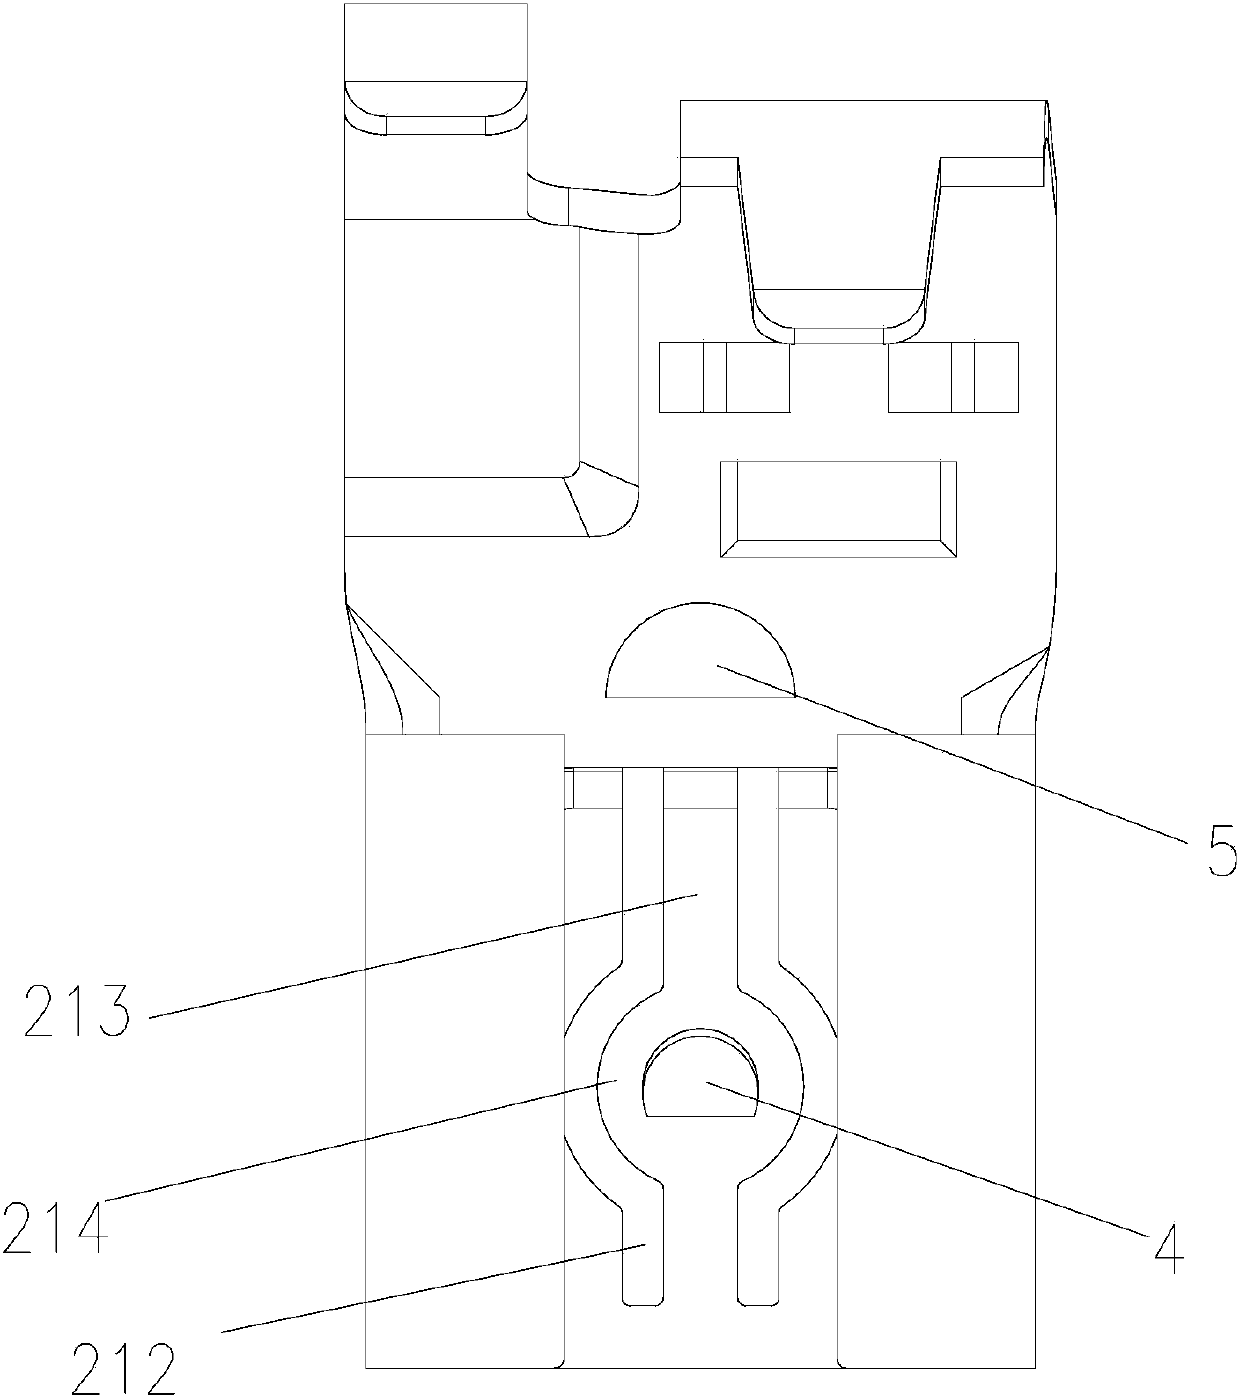 Flag-shaped terminal with low inserting force and high extracting force